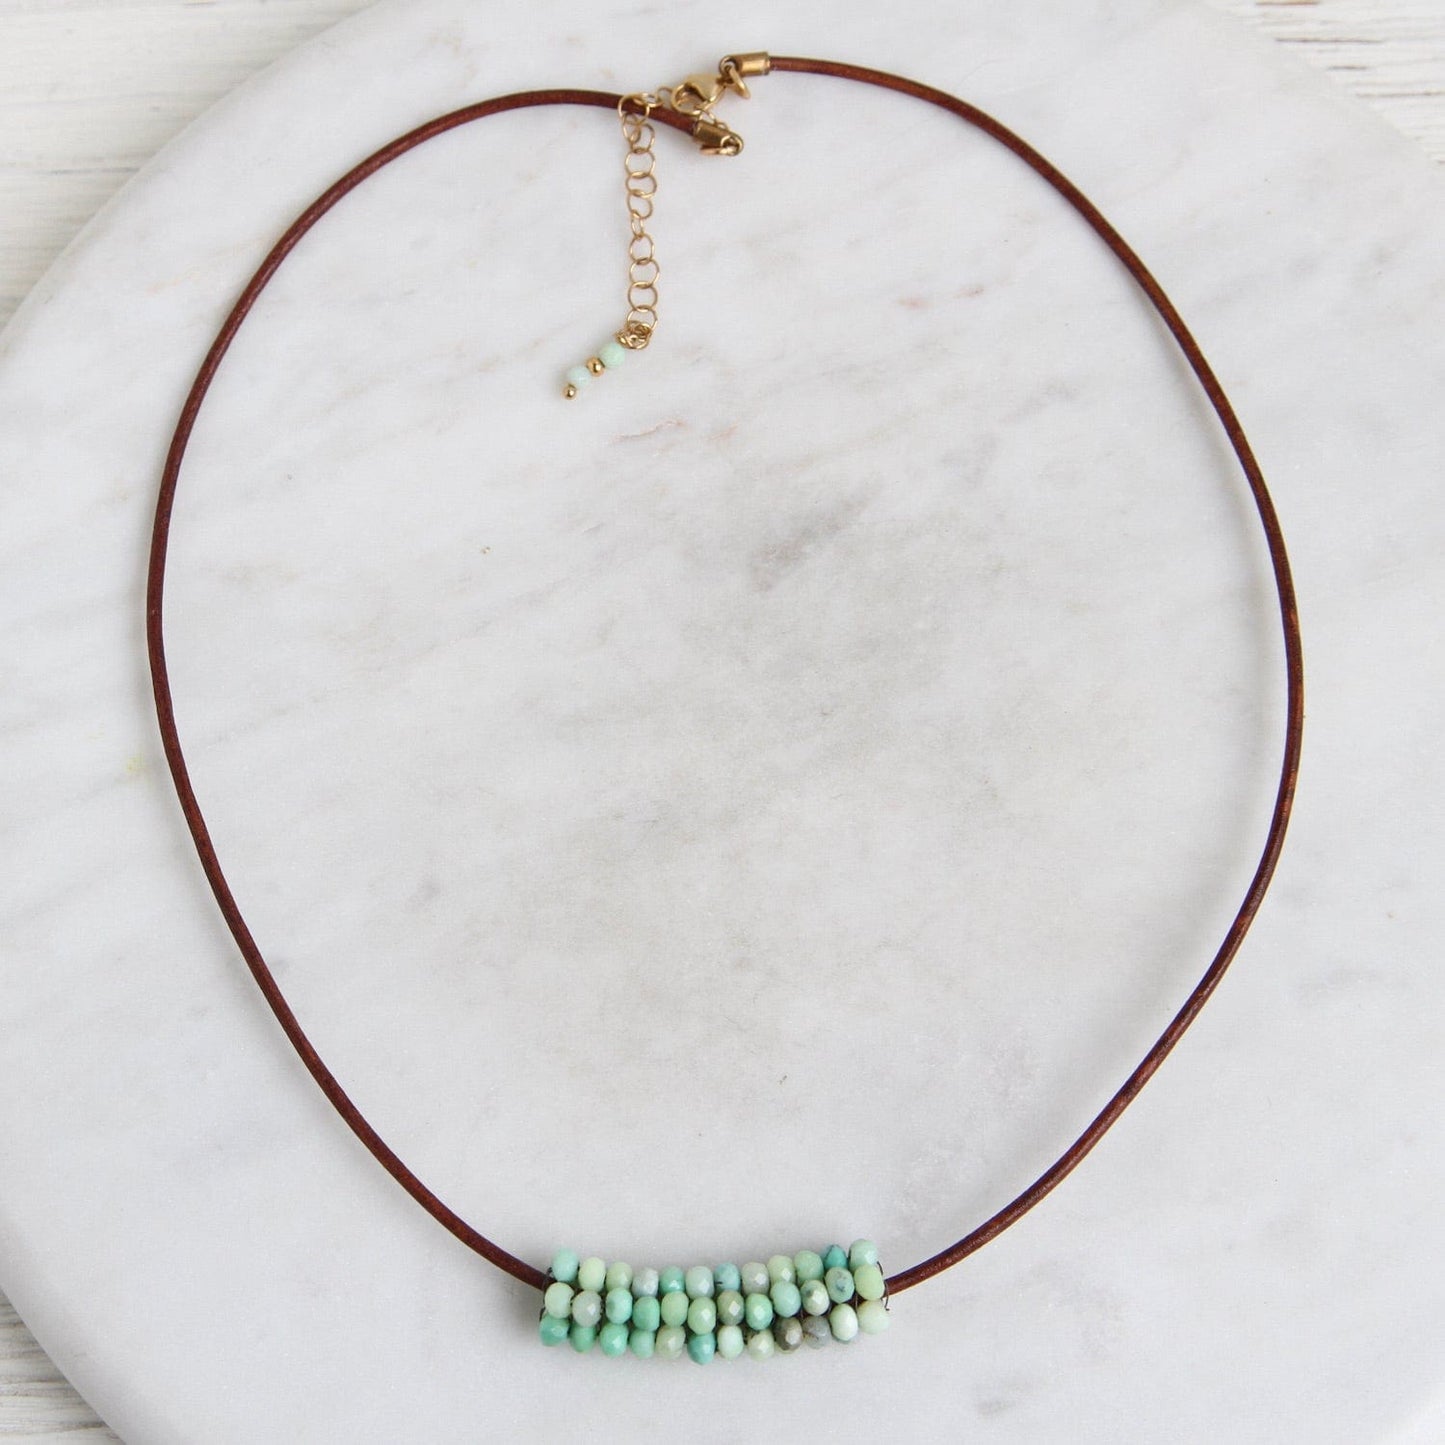 NKL-JM Hand Stitched Moss Opal Leather Necklace